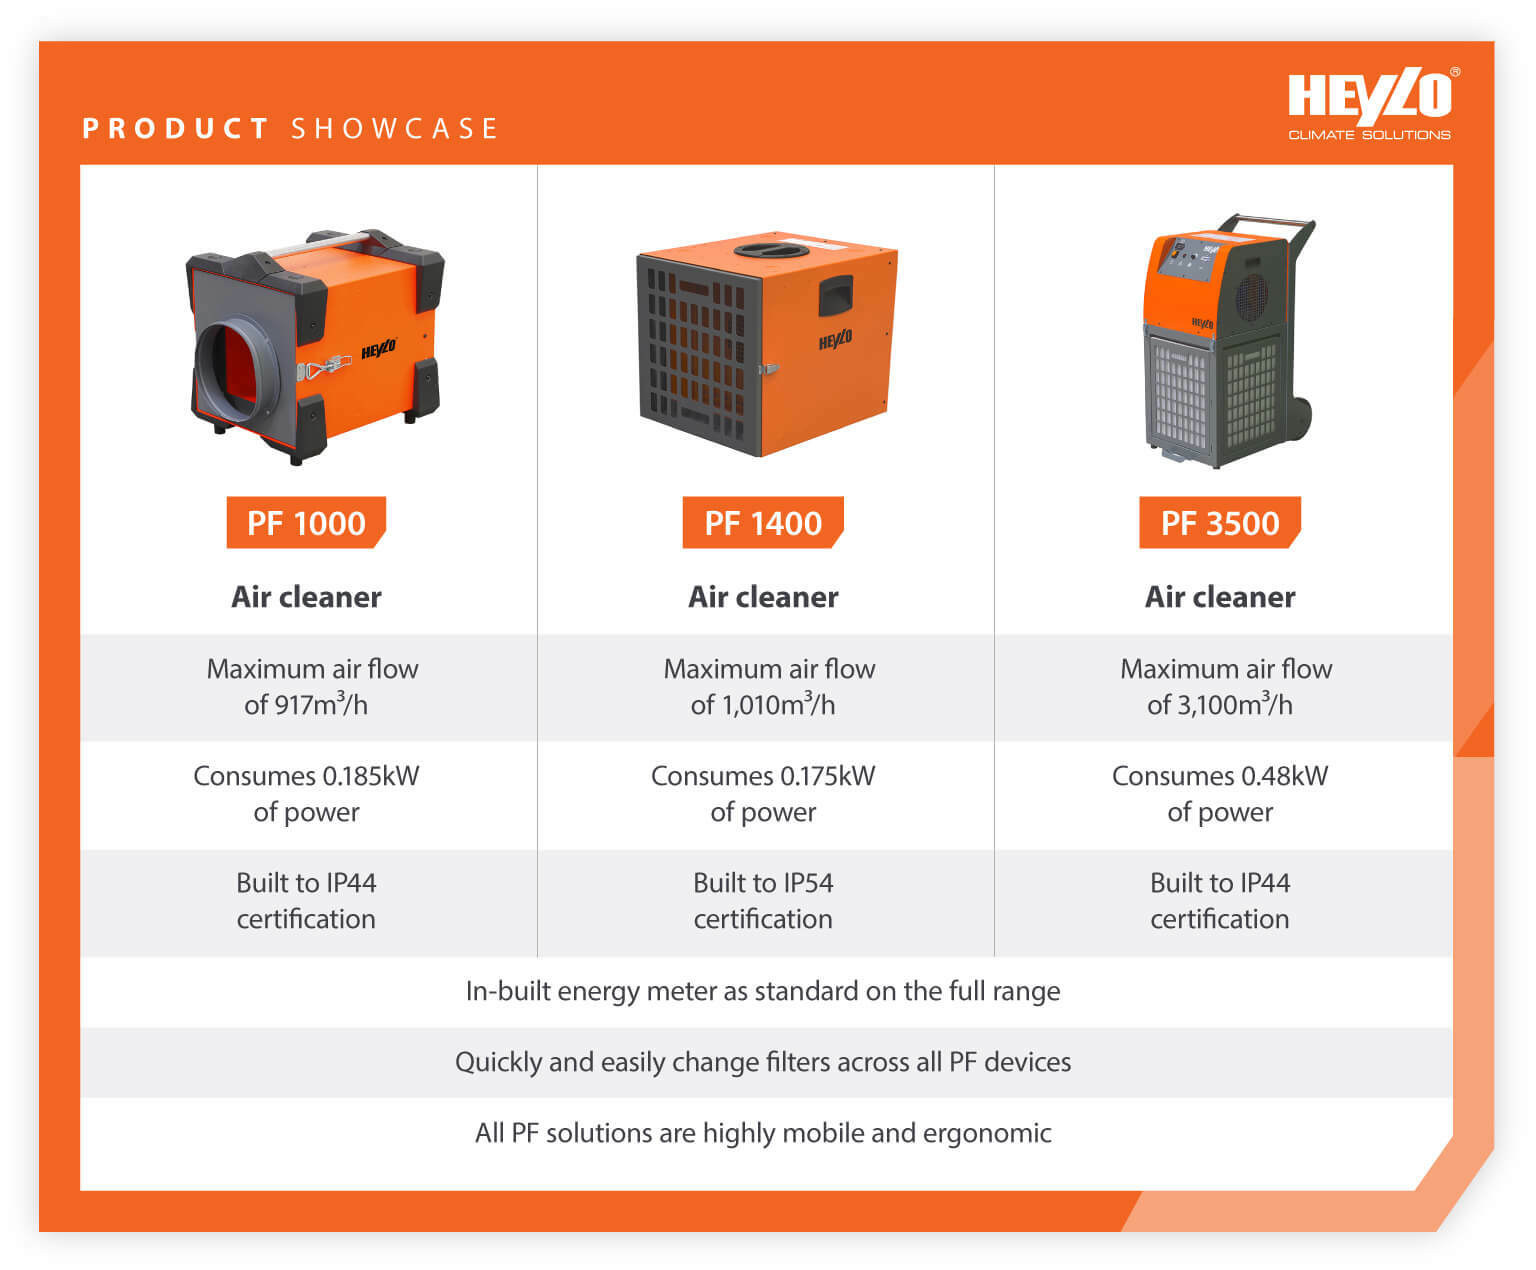 Product comparison table of 3 Heylo Air Cleaning units suitable for controlling construction dust